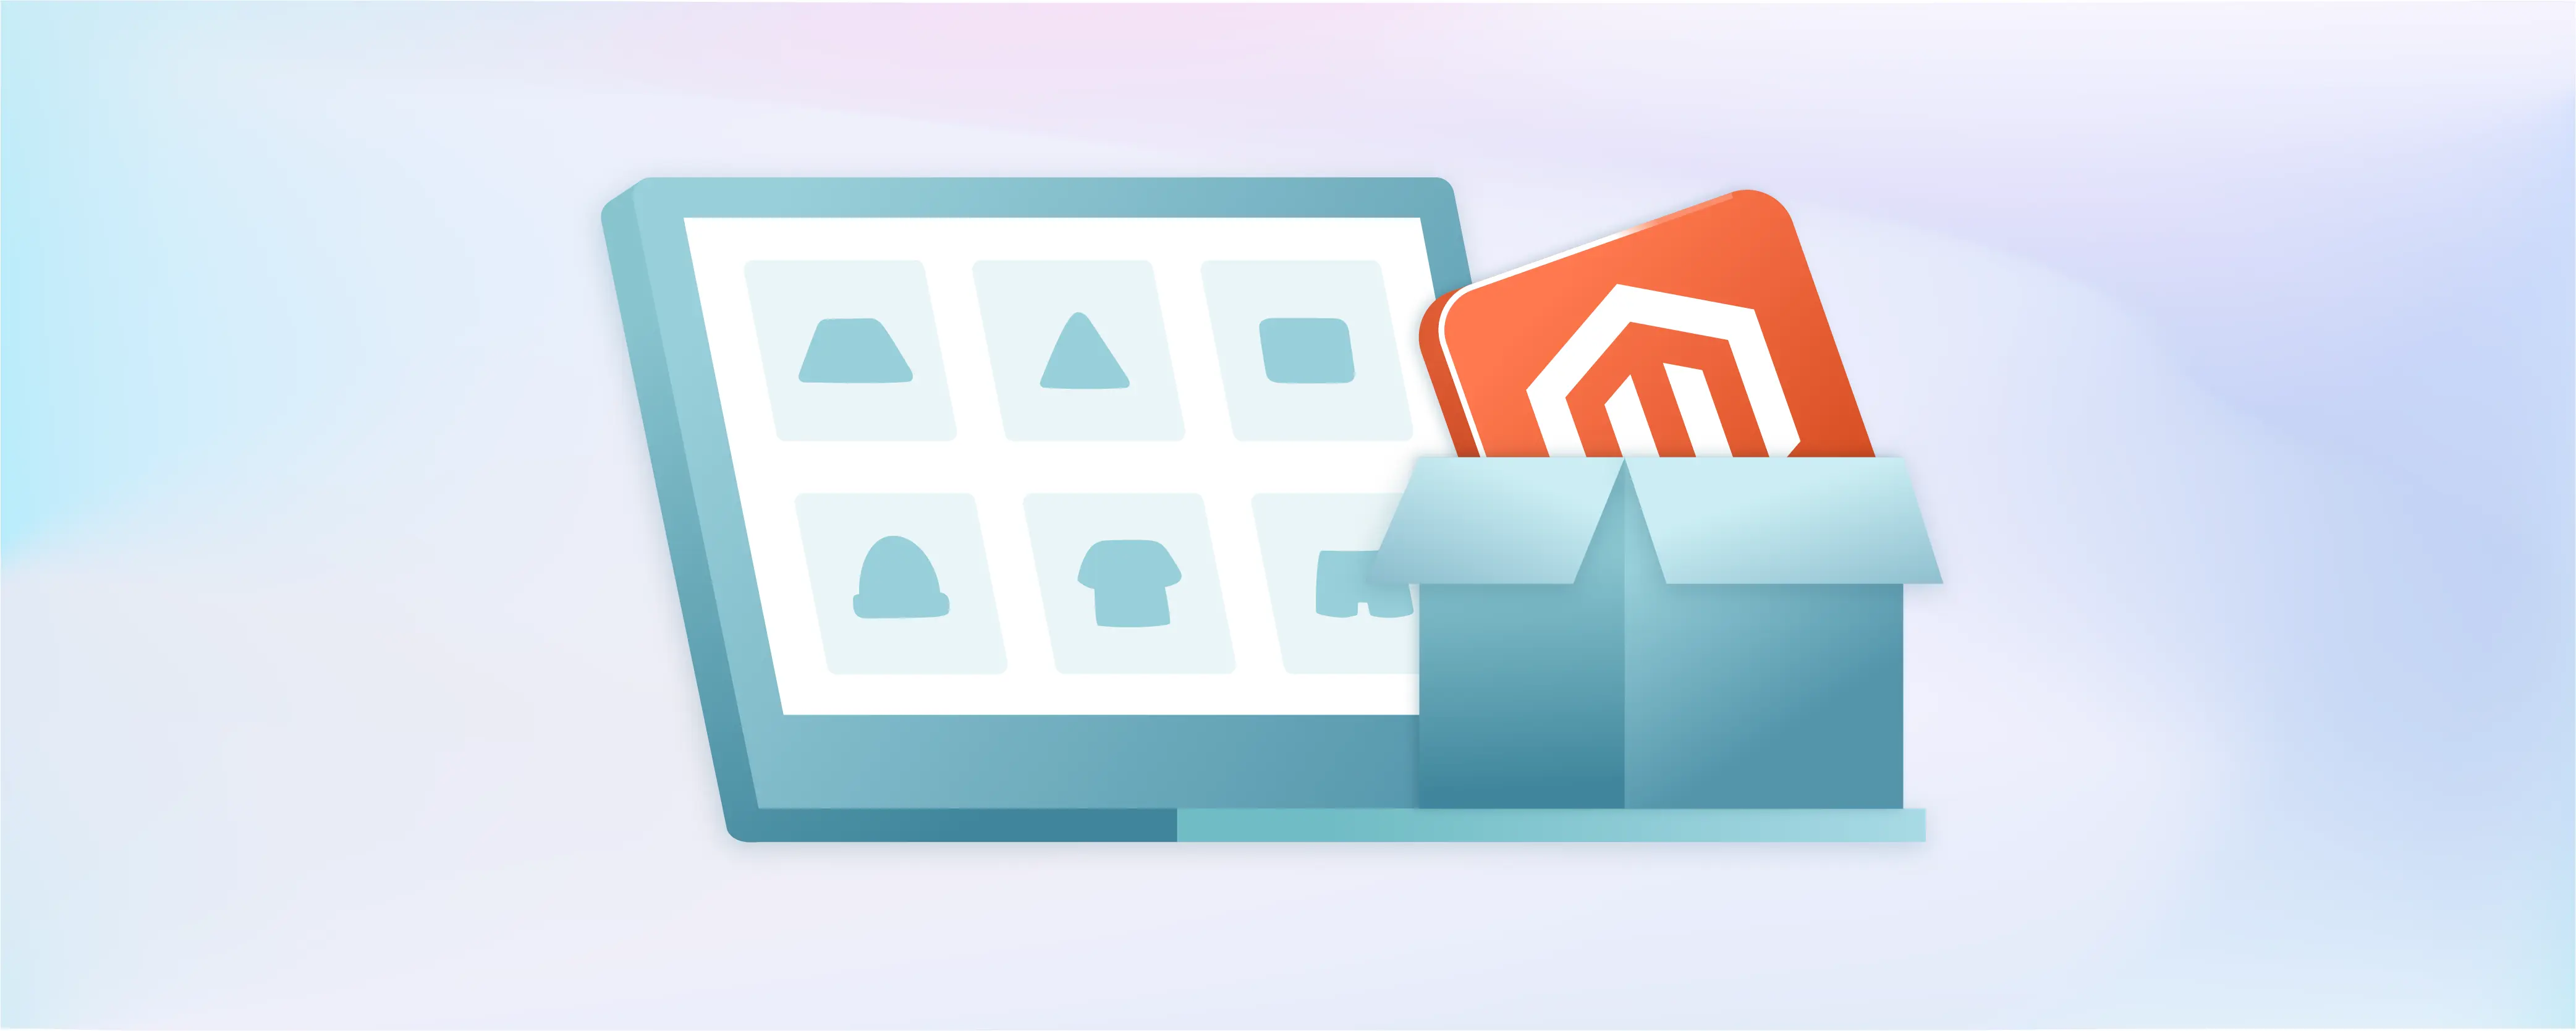 Magento Community Edition Review: Features and Benefits